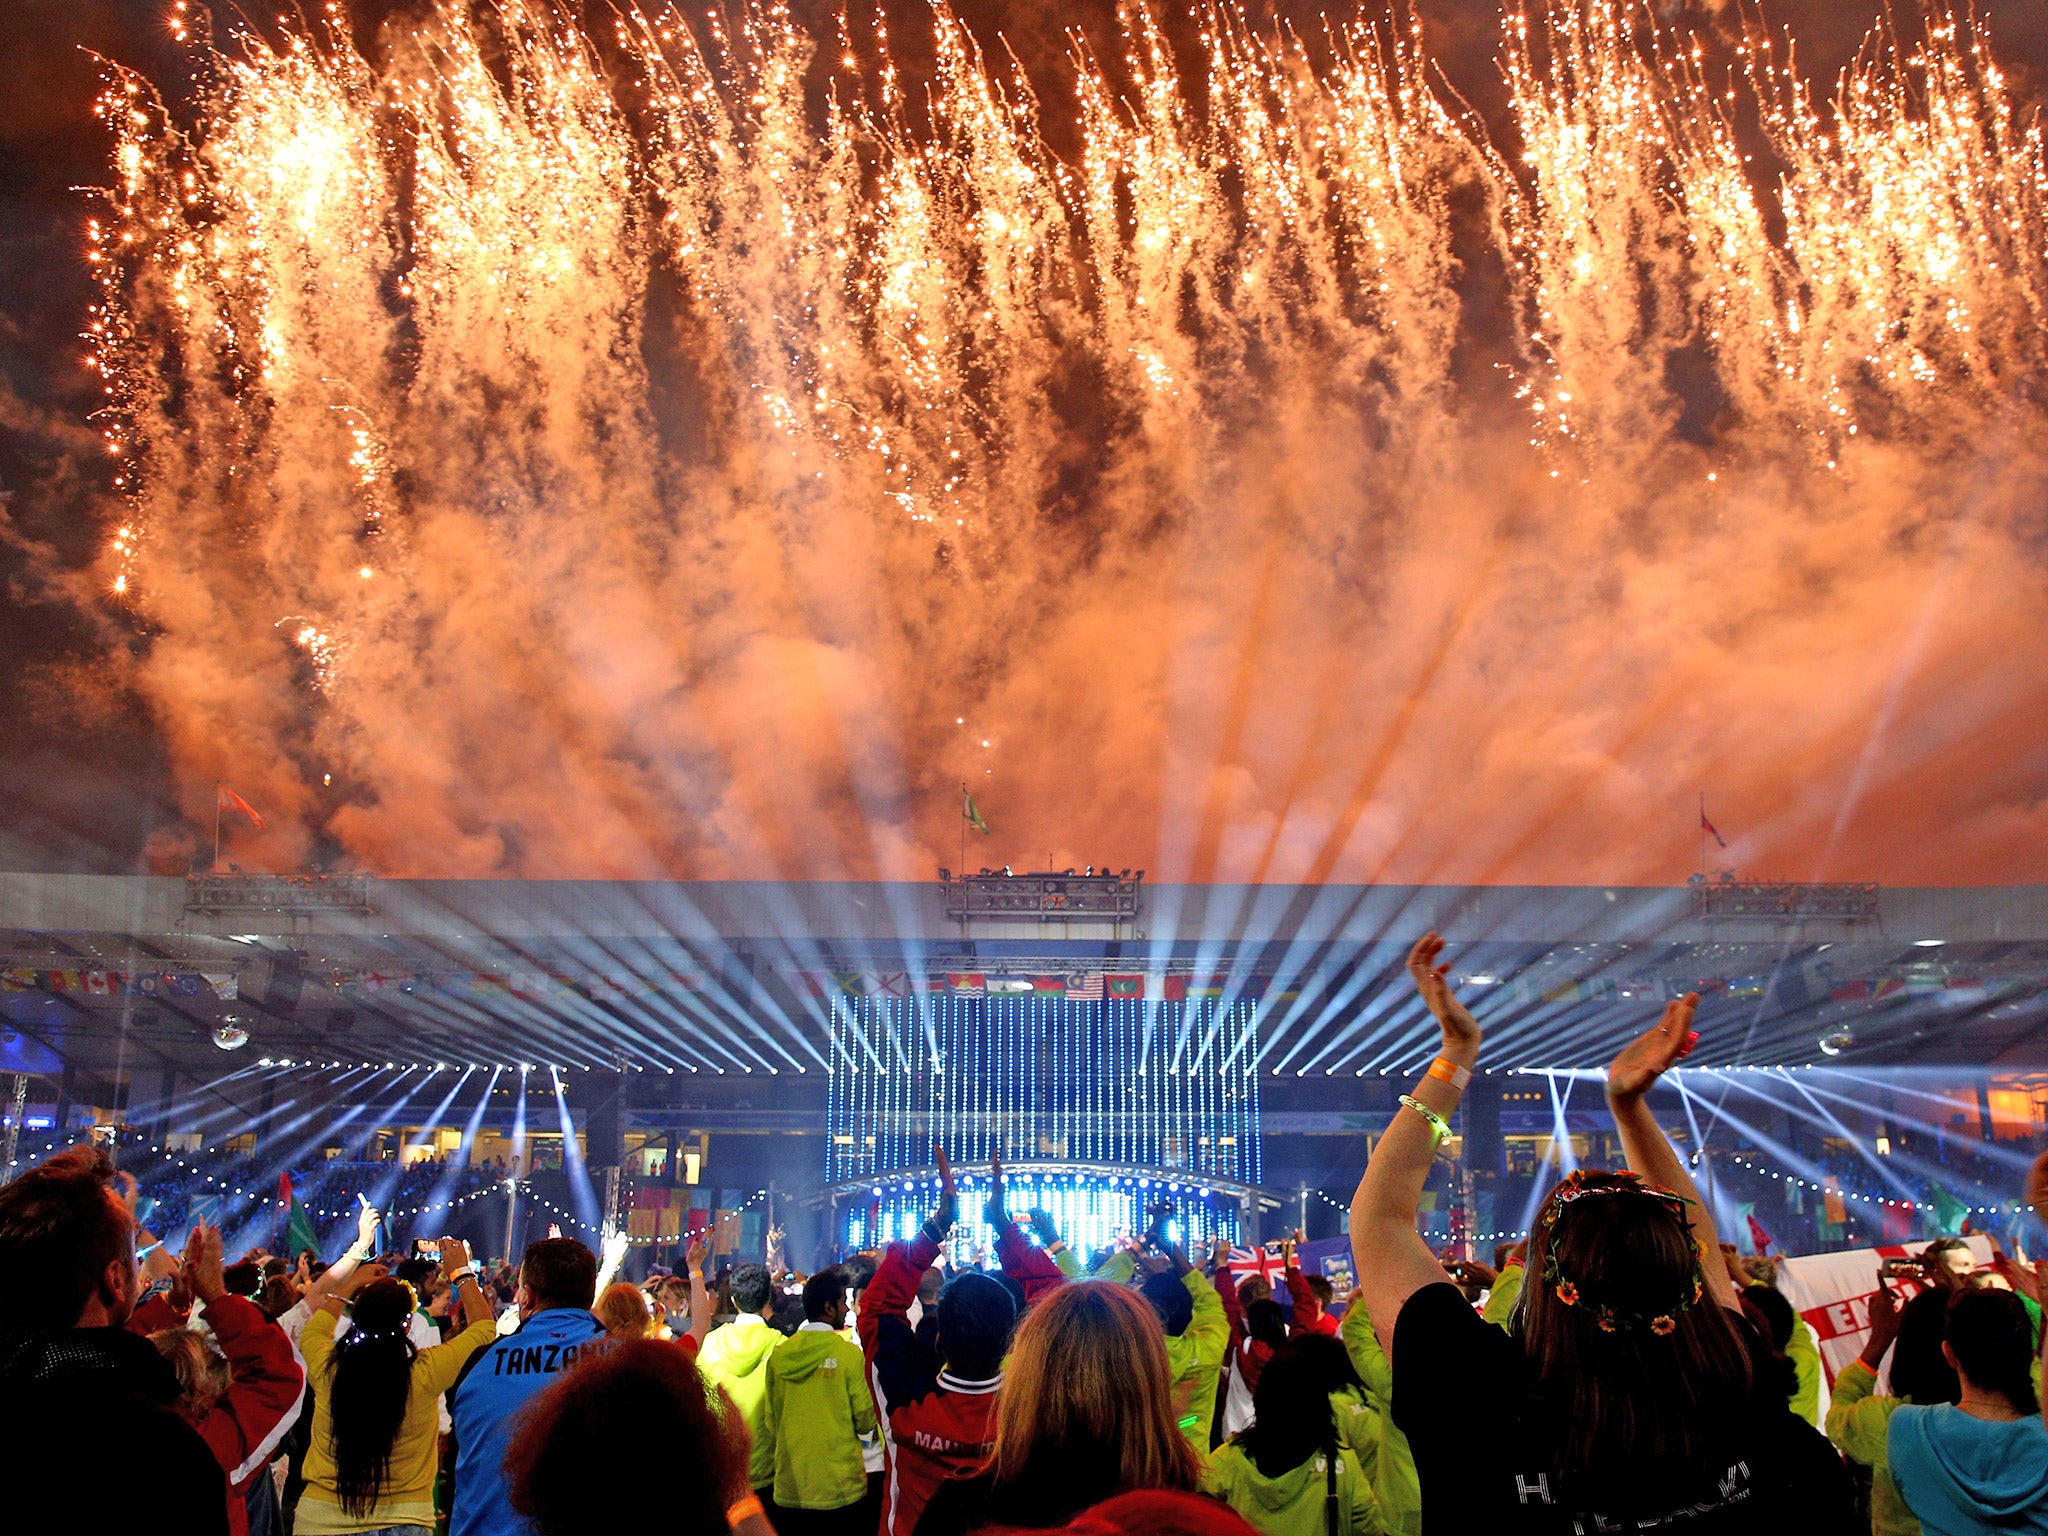 Fireworks light up the Glasgow sky as the closing ceremony marked the end of the Games